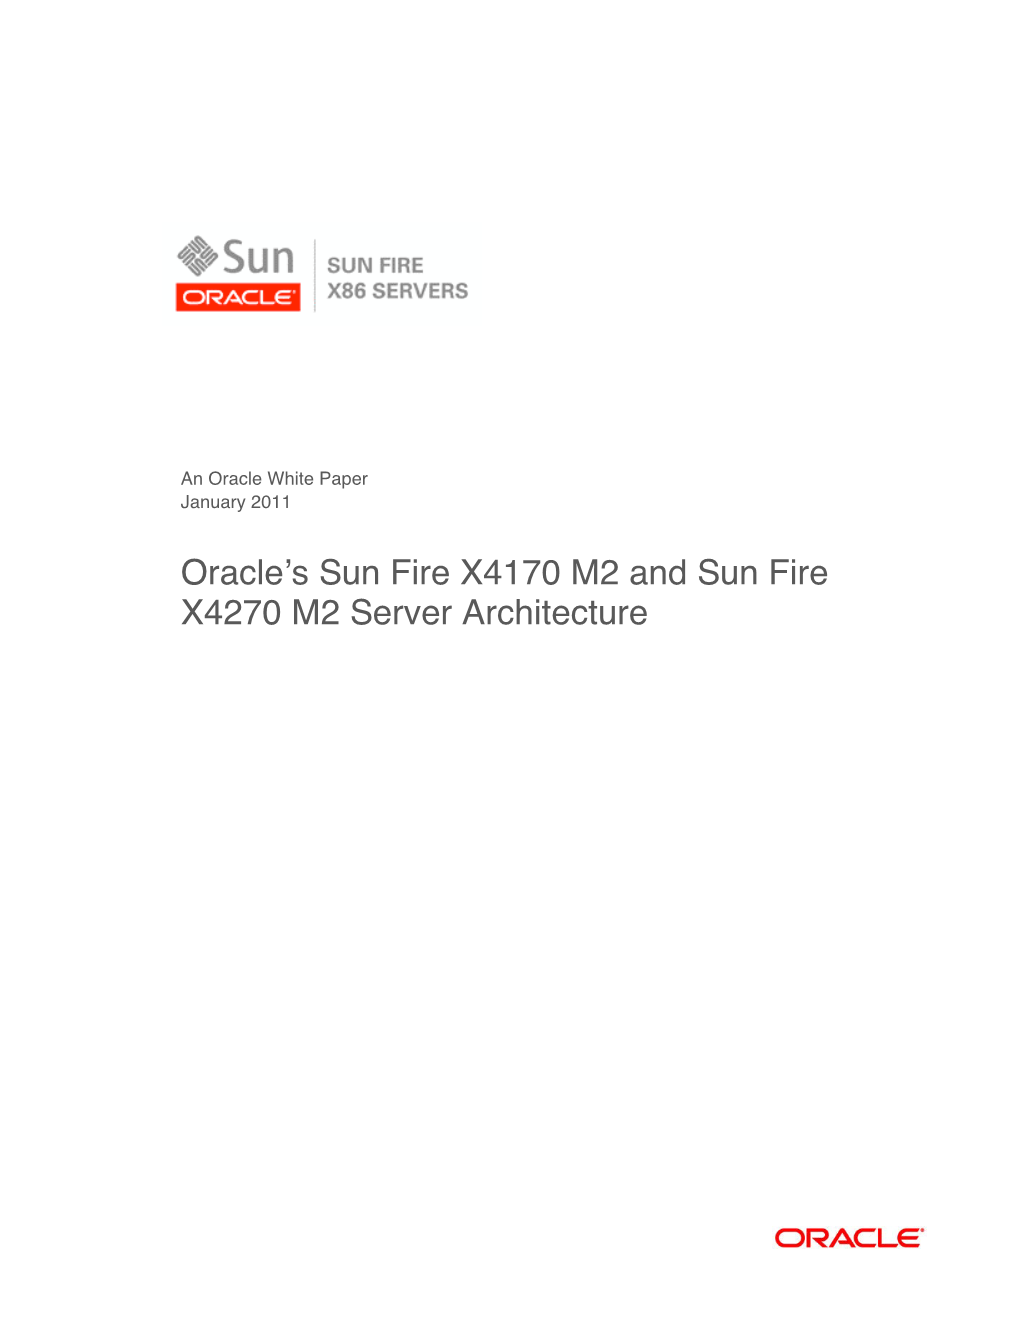 Oracleʼs Sun Fire X4170 M2 and Sun Fire X4270 M2 Server Architecture